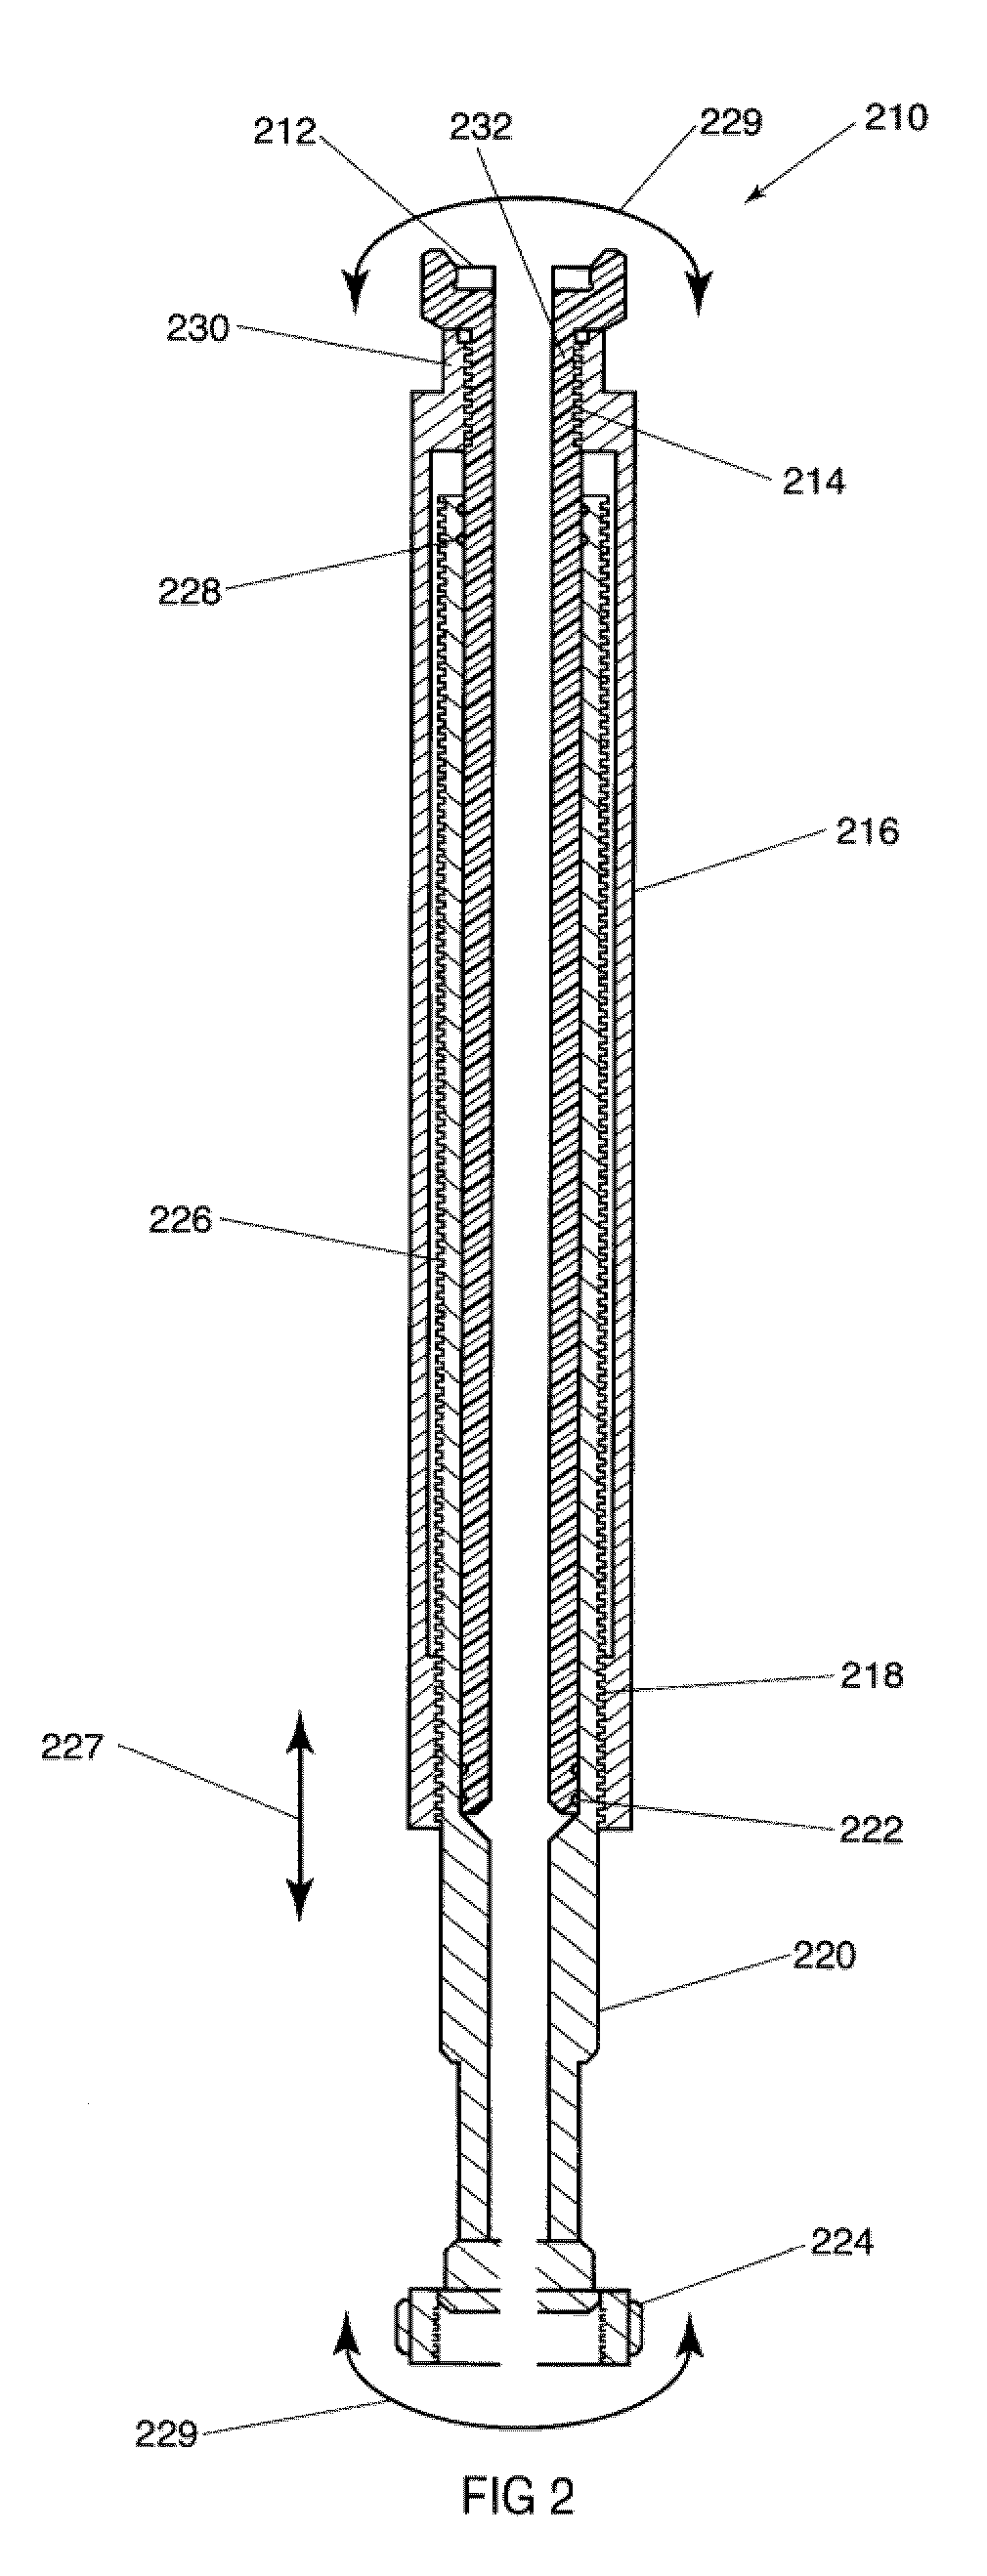 Automated flowback and information system